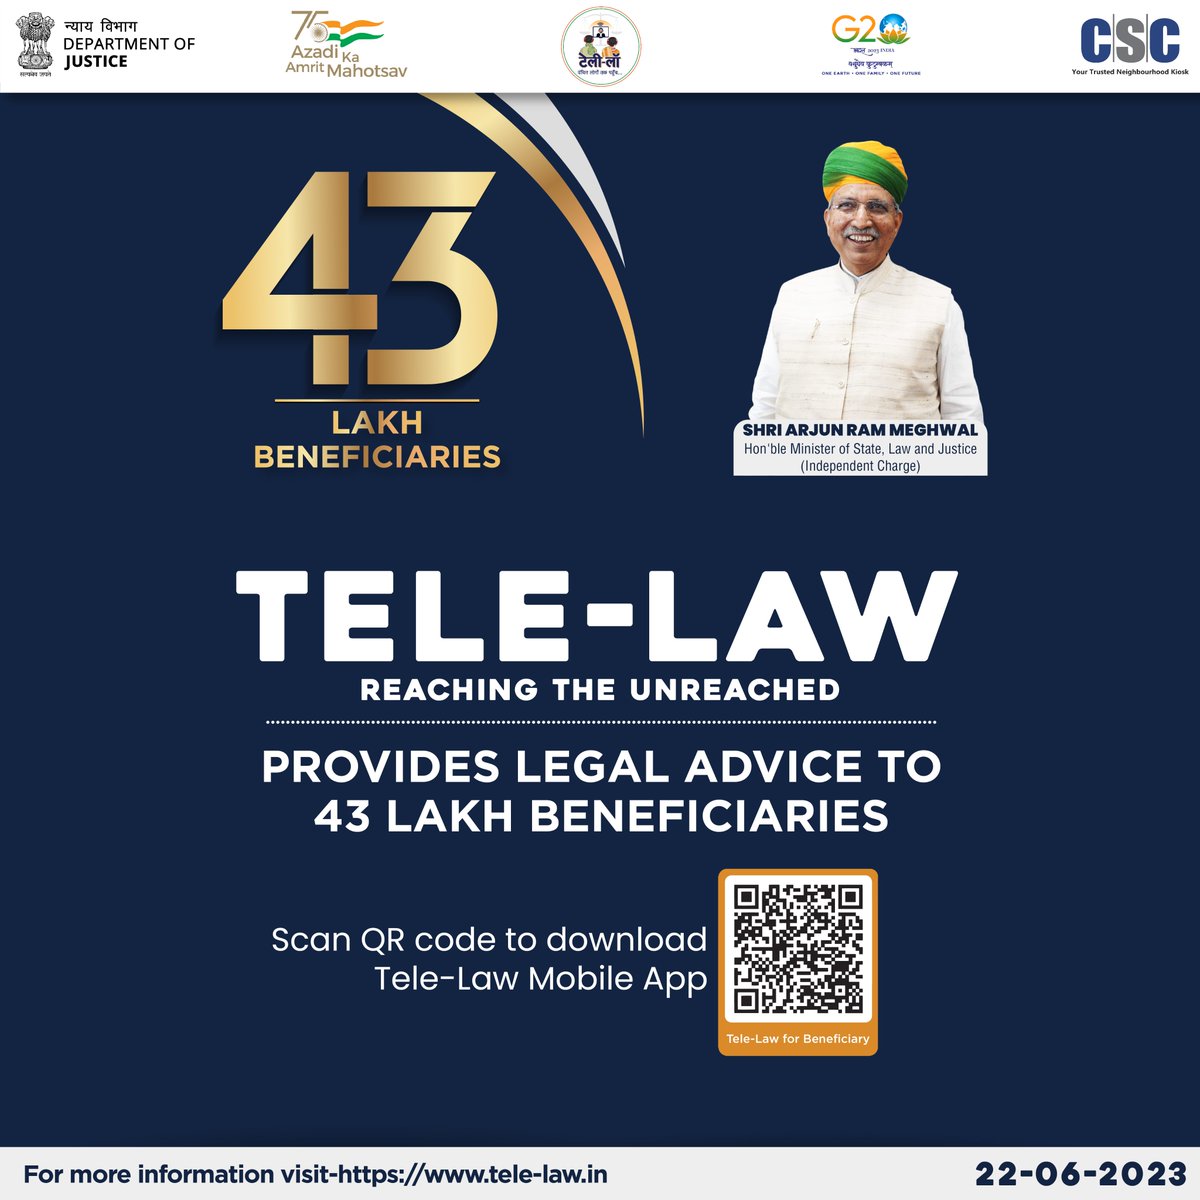 43 Lakh beneficiaries across the country have been empowered with pre-litigation advice provided by #TeleLaw.

A warm congratulations to all...

#AccesstoJustice #ReachingtheUnreached #Doj #DigitalIndia #CSC #JusticeForAll #DepartmentOfJustice @MLJ_GoI @arjunrammeghwal